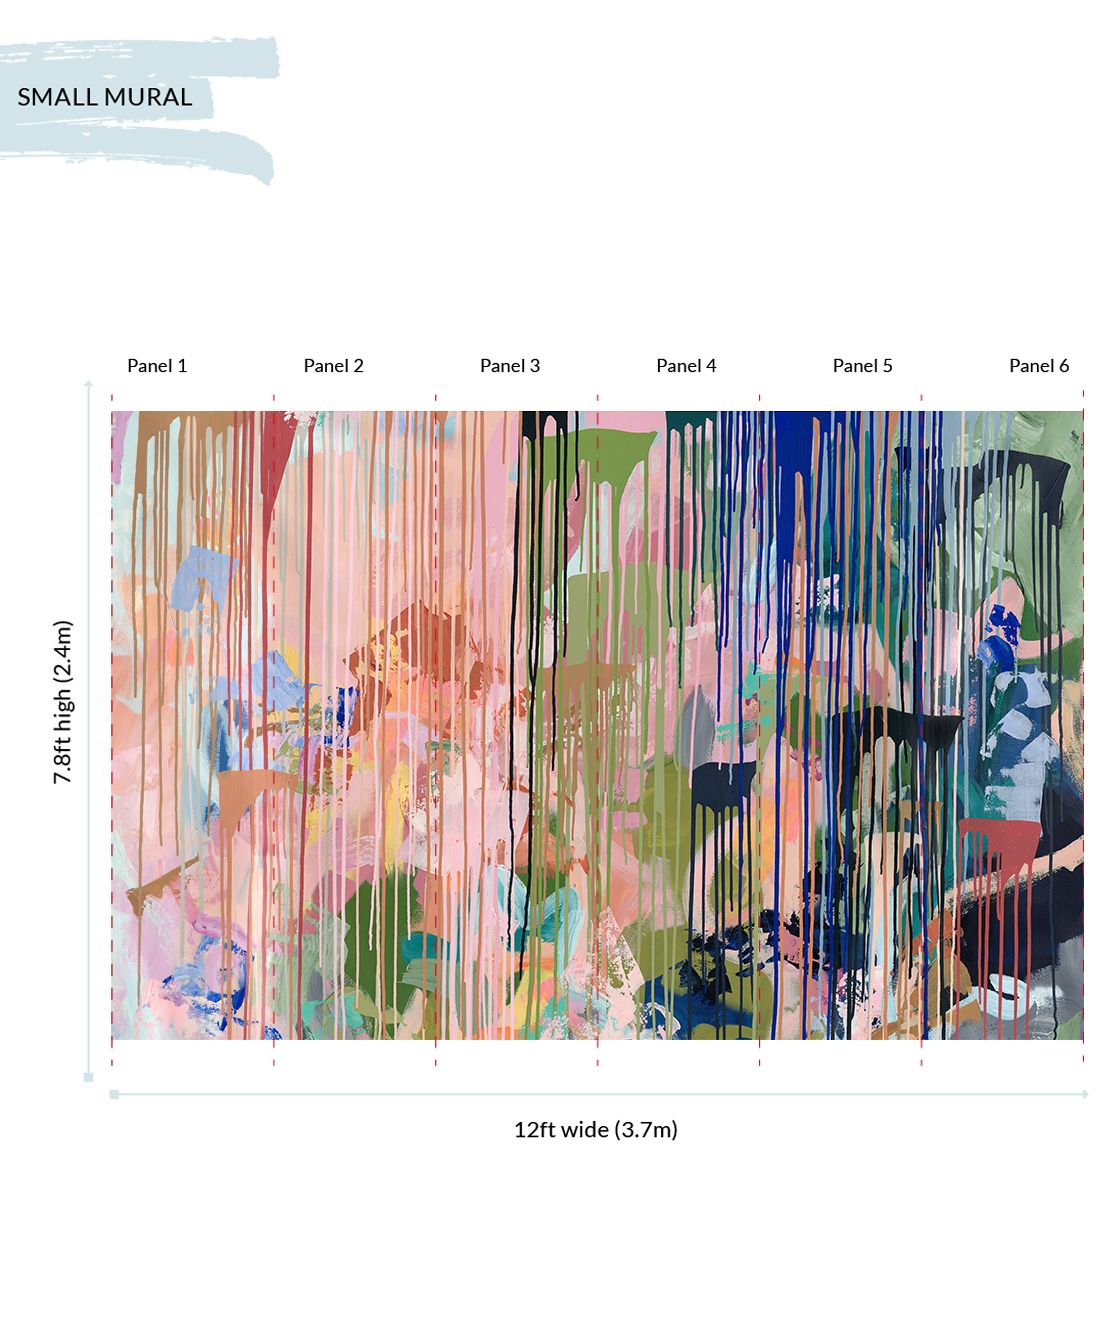 Path Less Travelled Wallpaper Mural • Colorful Painterly Wallpaper • Tiff Manuell • Abstract Expressionist Wallpaper • Small Mural